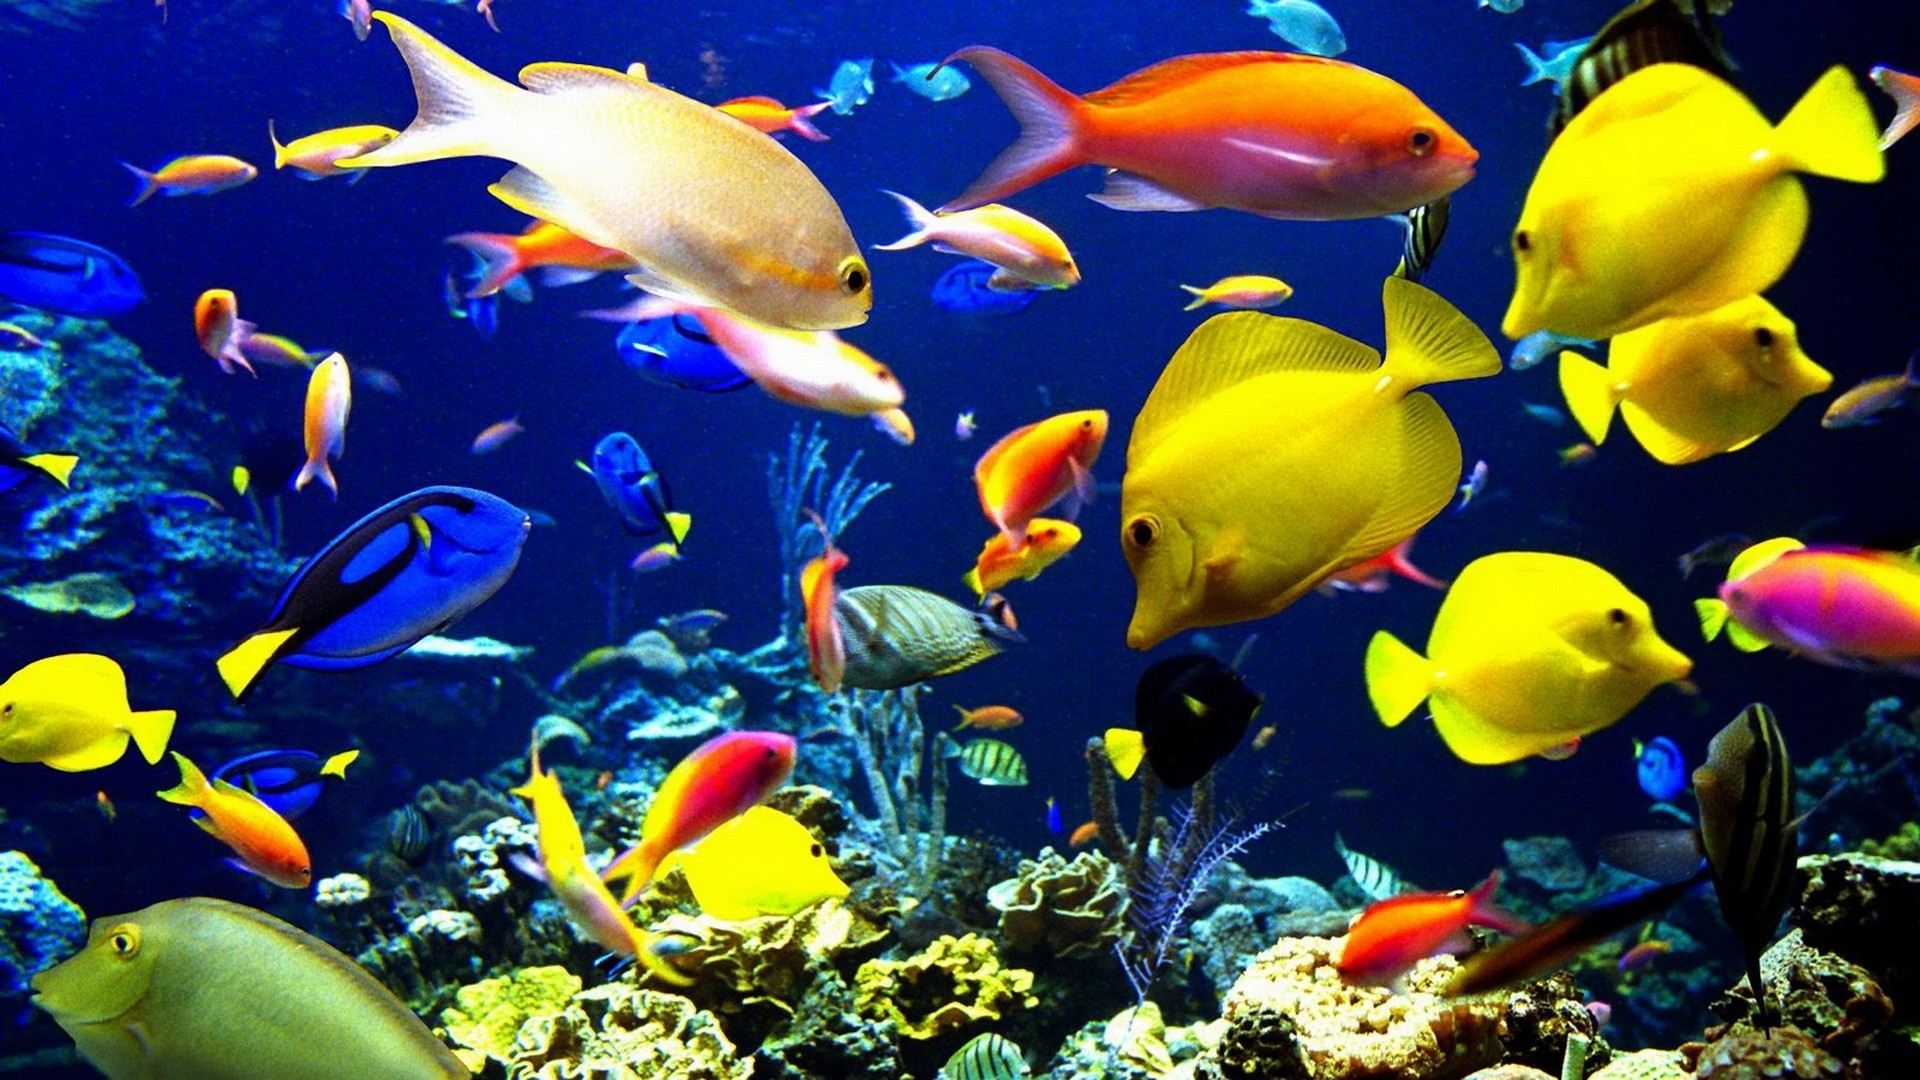 1920x1080 Nature animals sealife tropical fishes color underwater sea ocean coral reef  wallpaper |  | 27888 | WallpaperUP